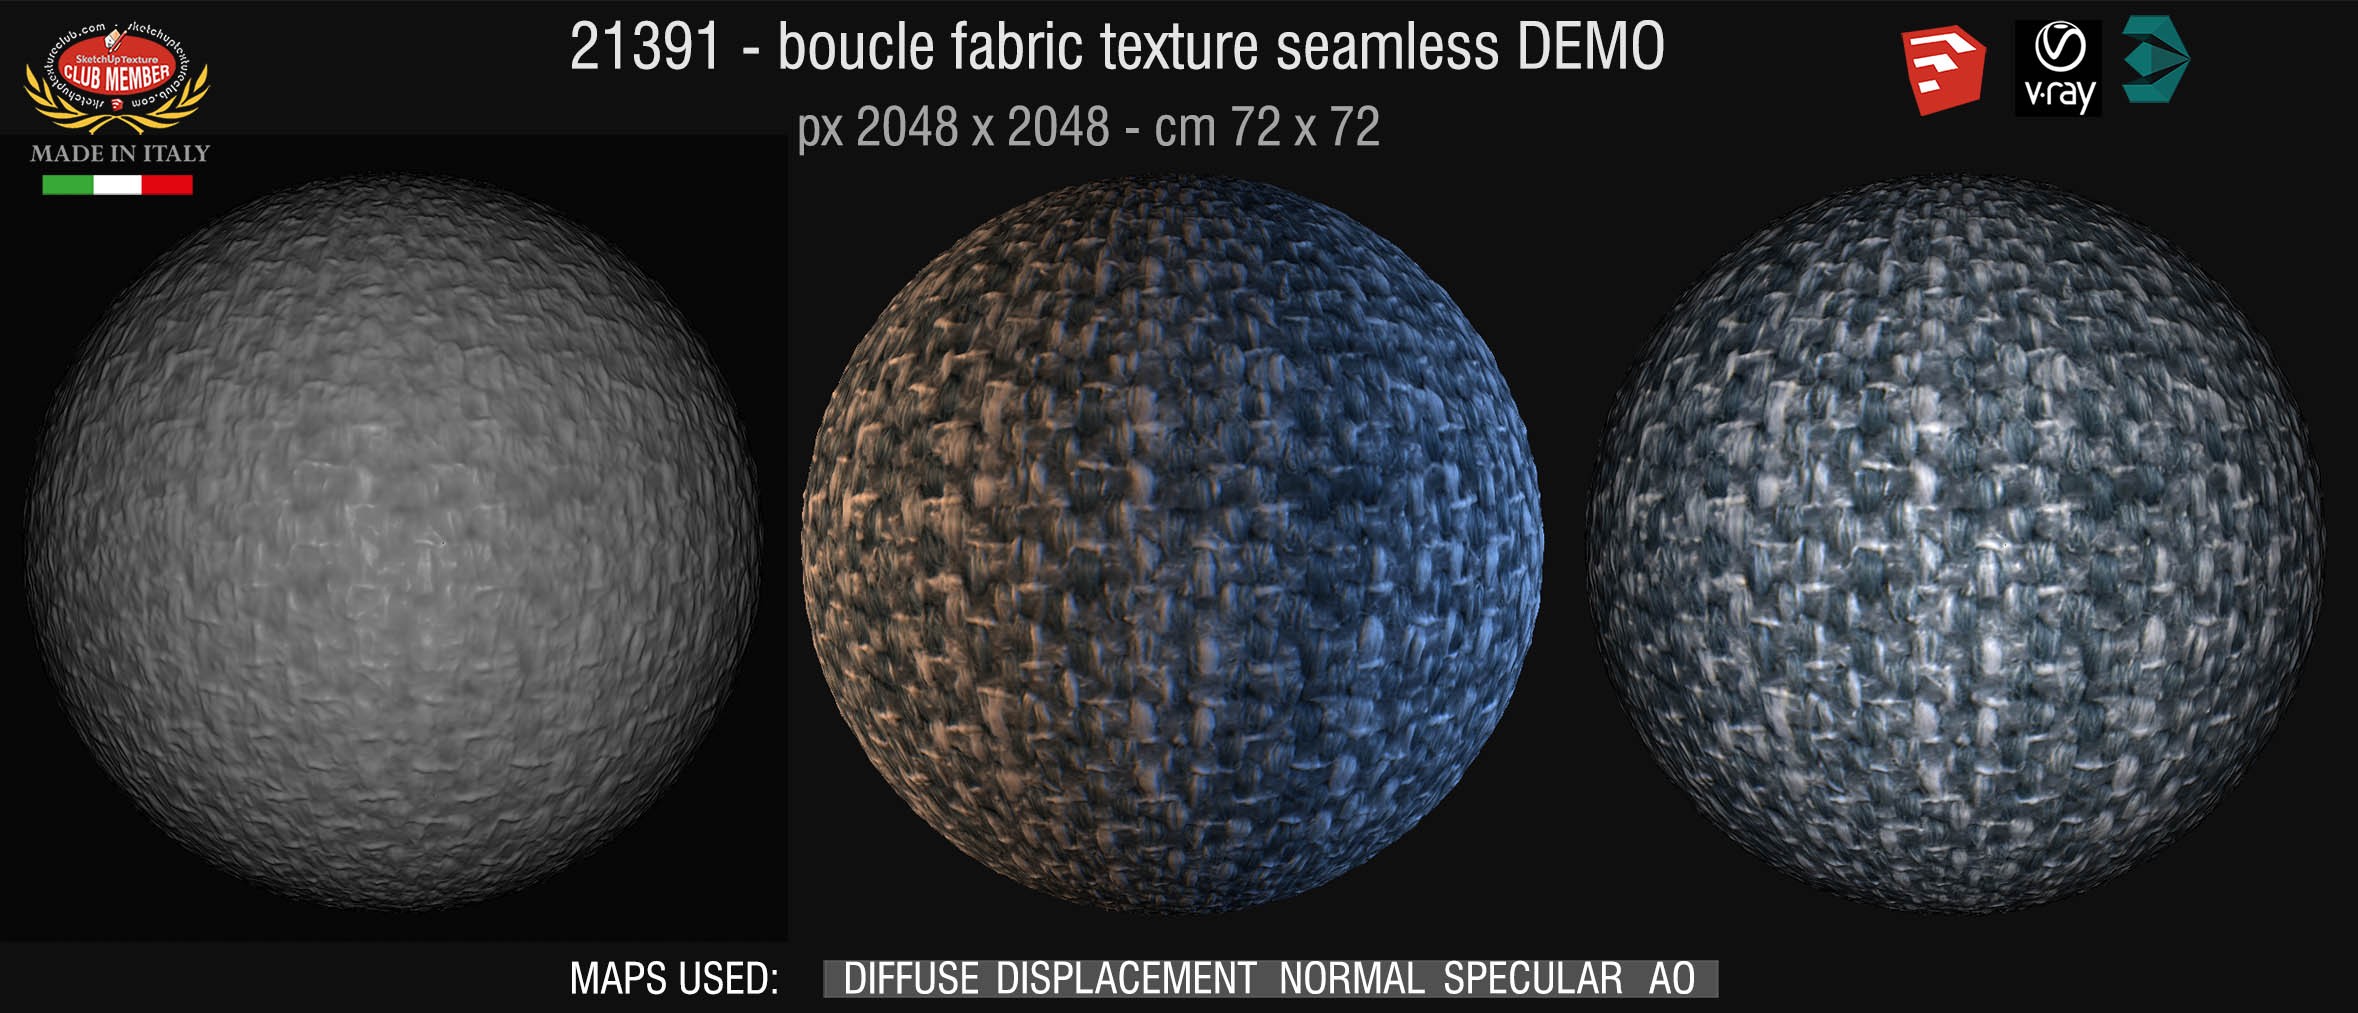 21391 boucle fabric texture-seamless + maps DEMO